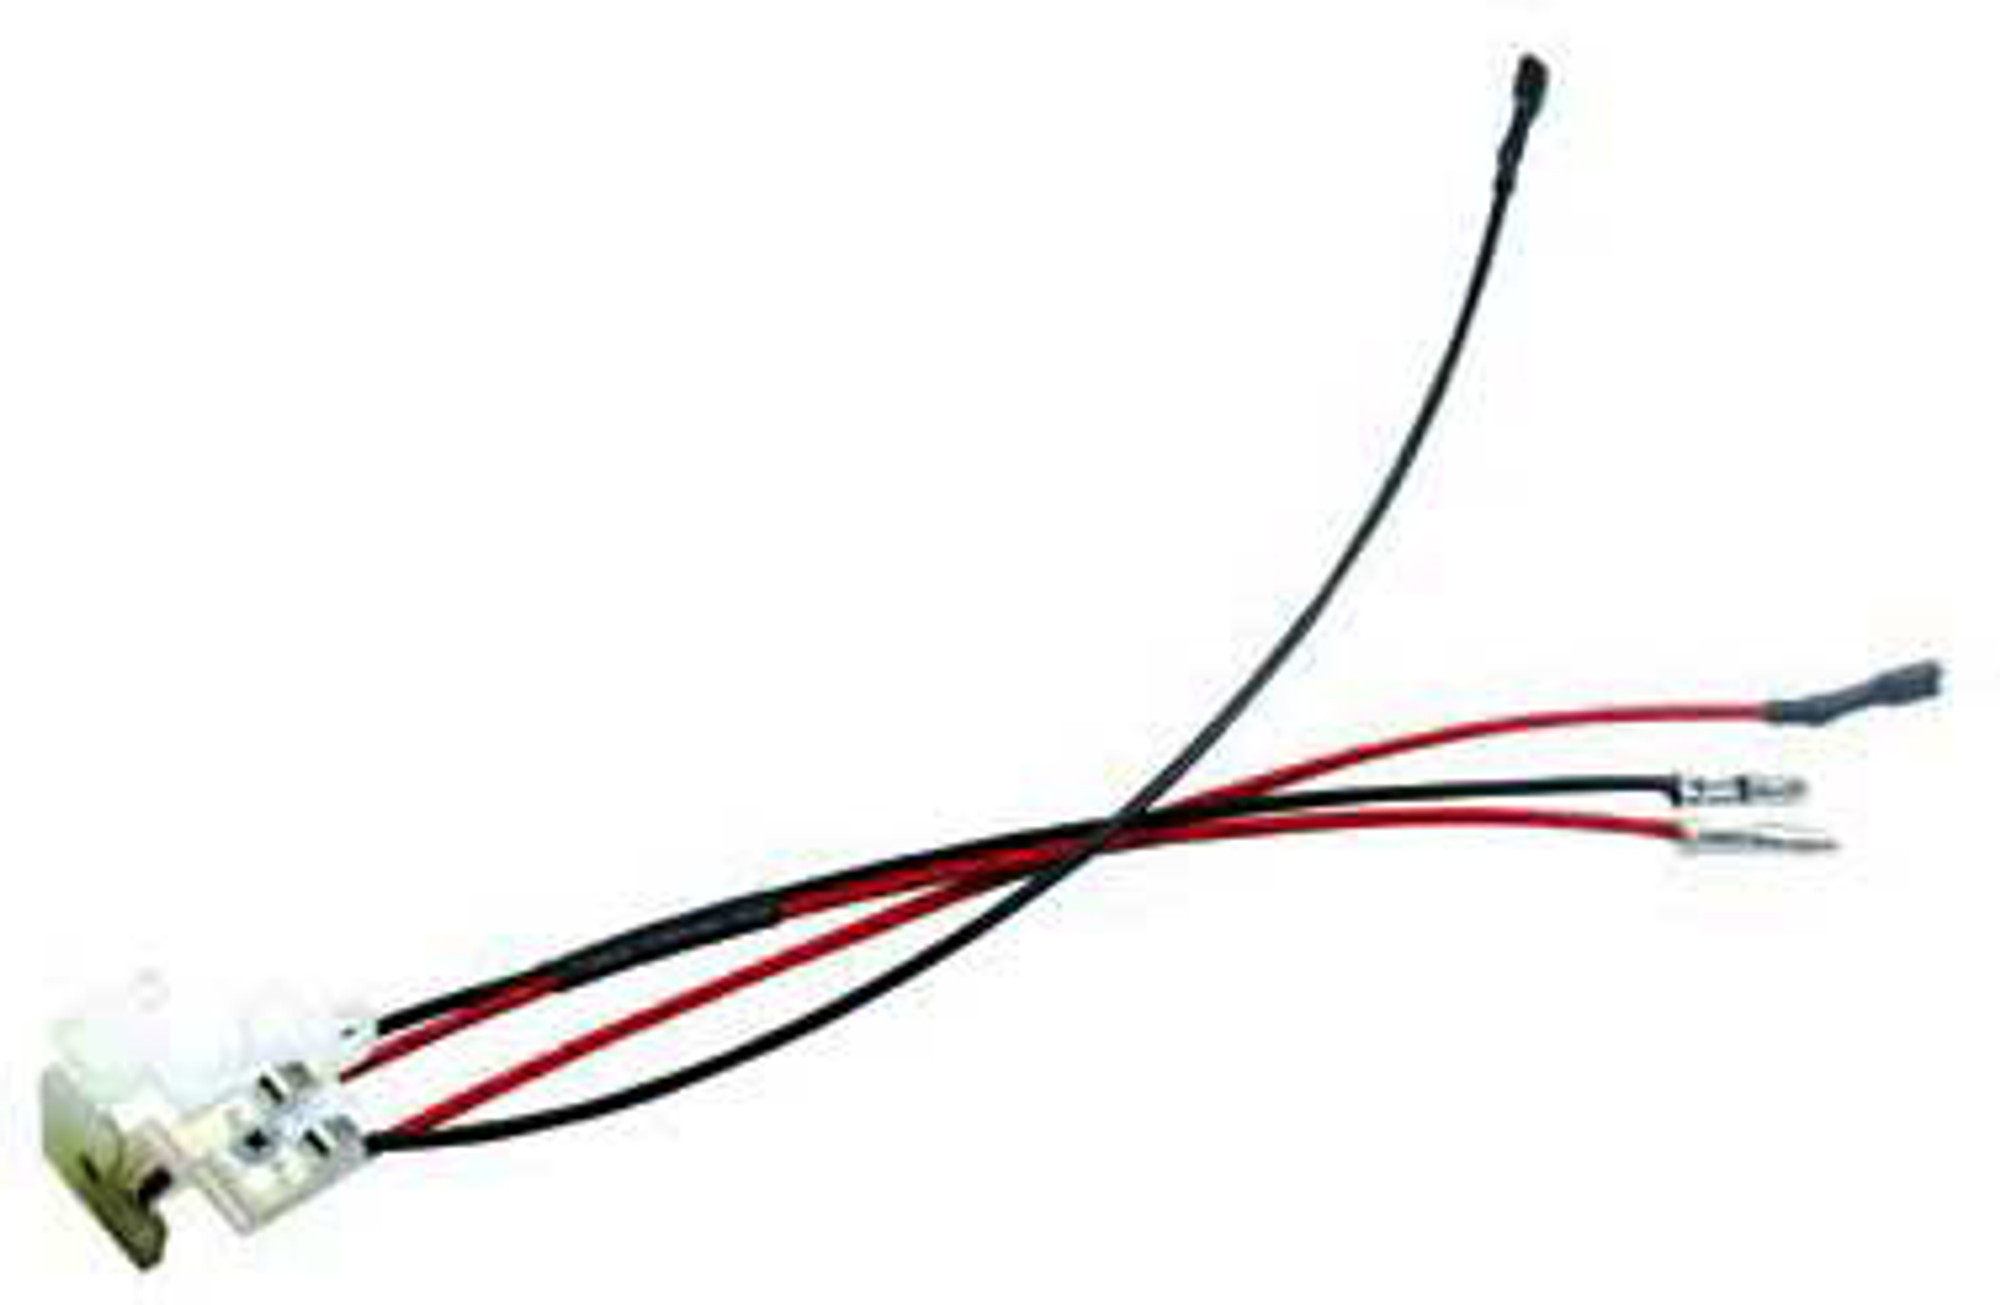 ICS Wiring Switch Assebmly for ICS M4  M16 series Airsoft AEG (Retractable Stock  Wiring to the Front)